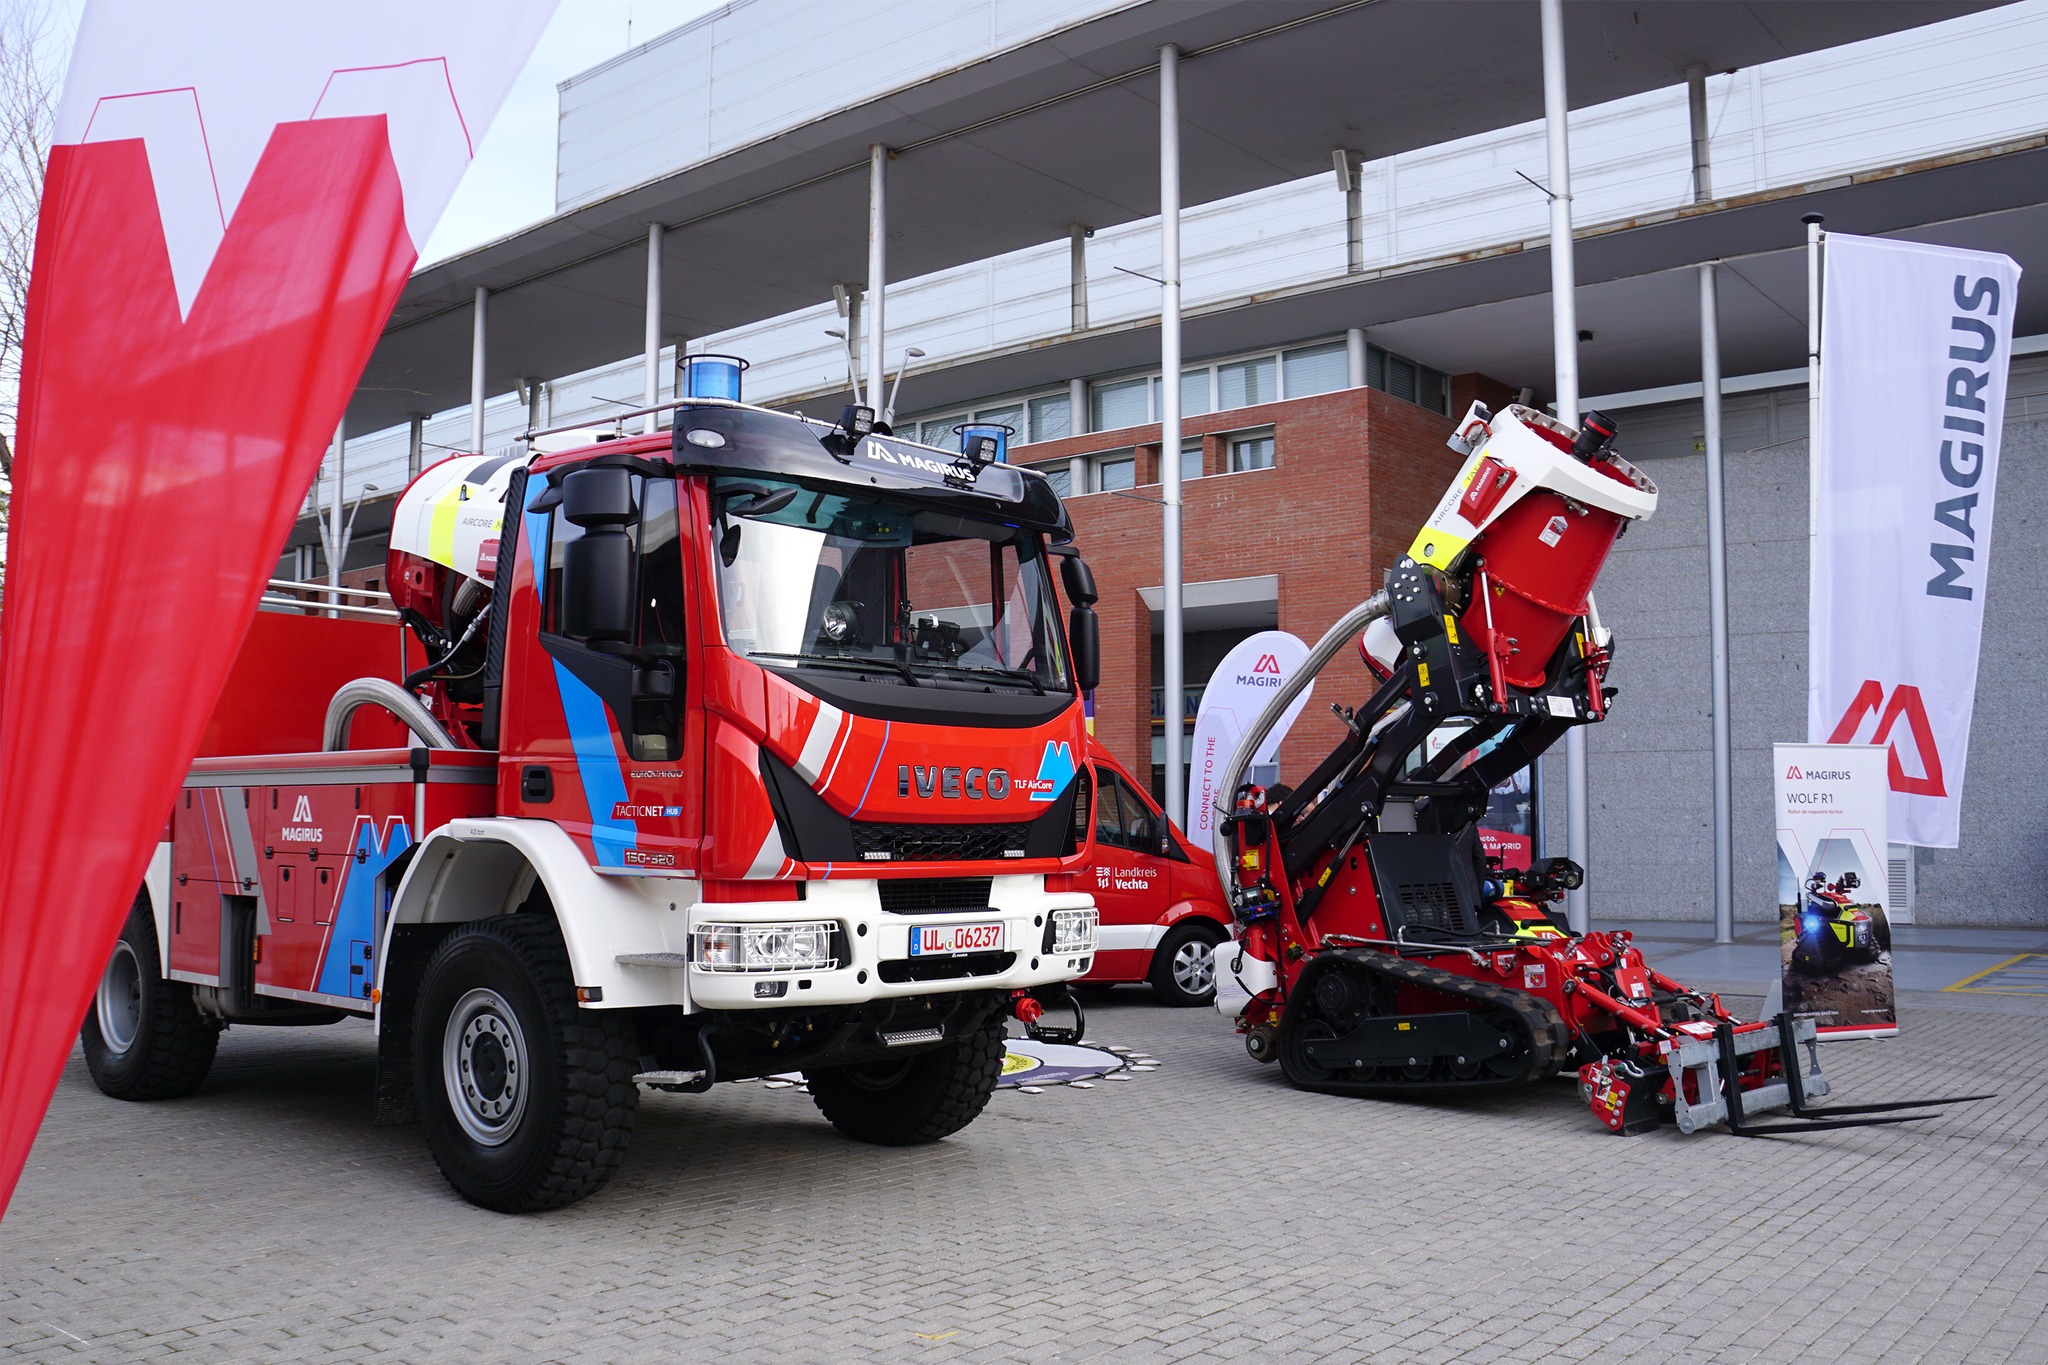 1-ISJ- Gallery: New Magirus products launched at SICUR 2022